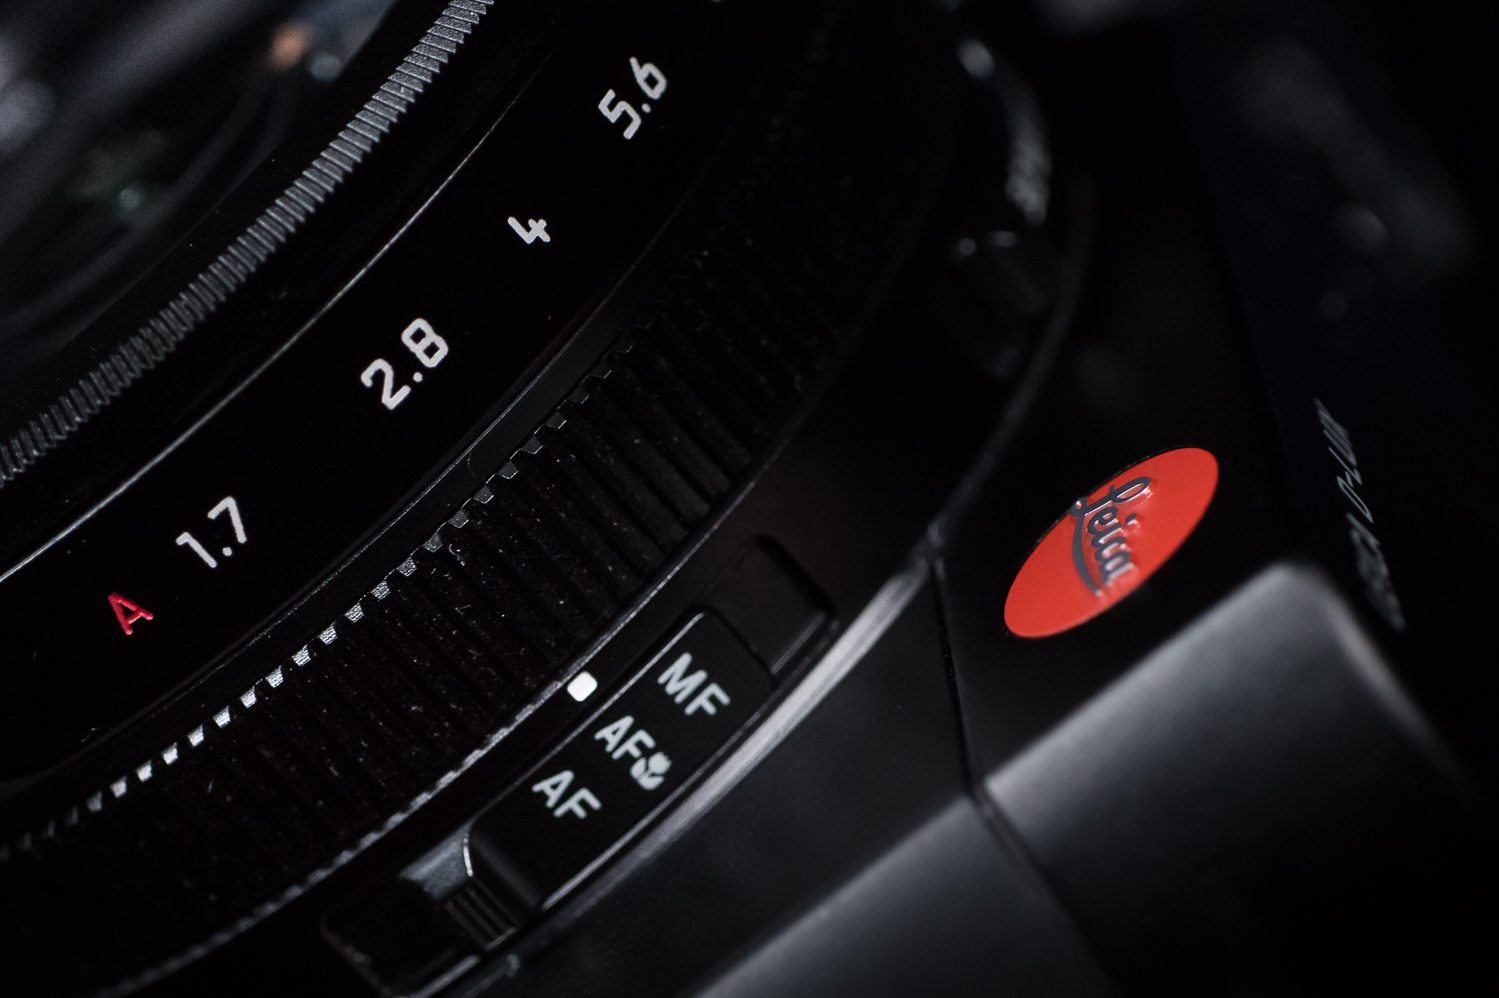 LEICA D-LUX (typ 109) User Report - Part 1/2 — Kristian Dowling